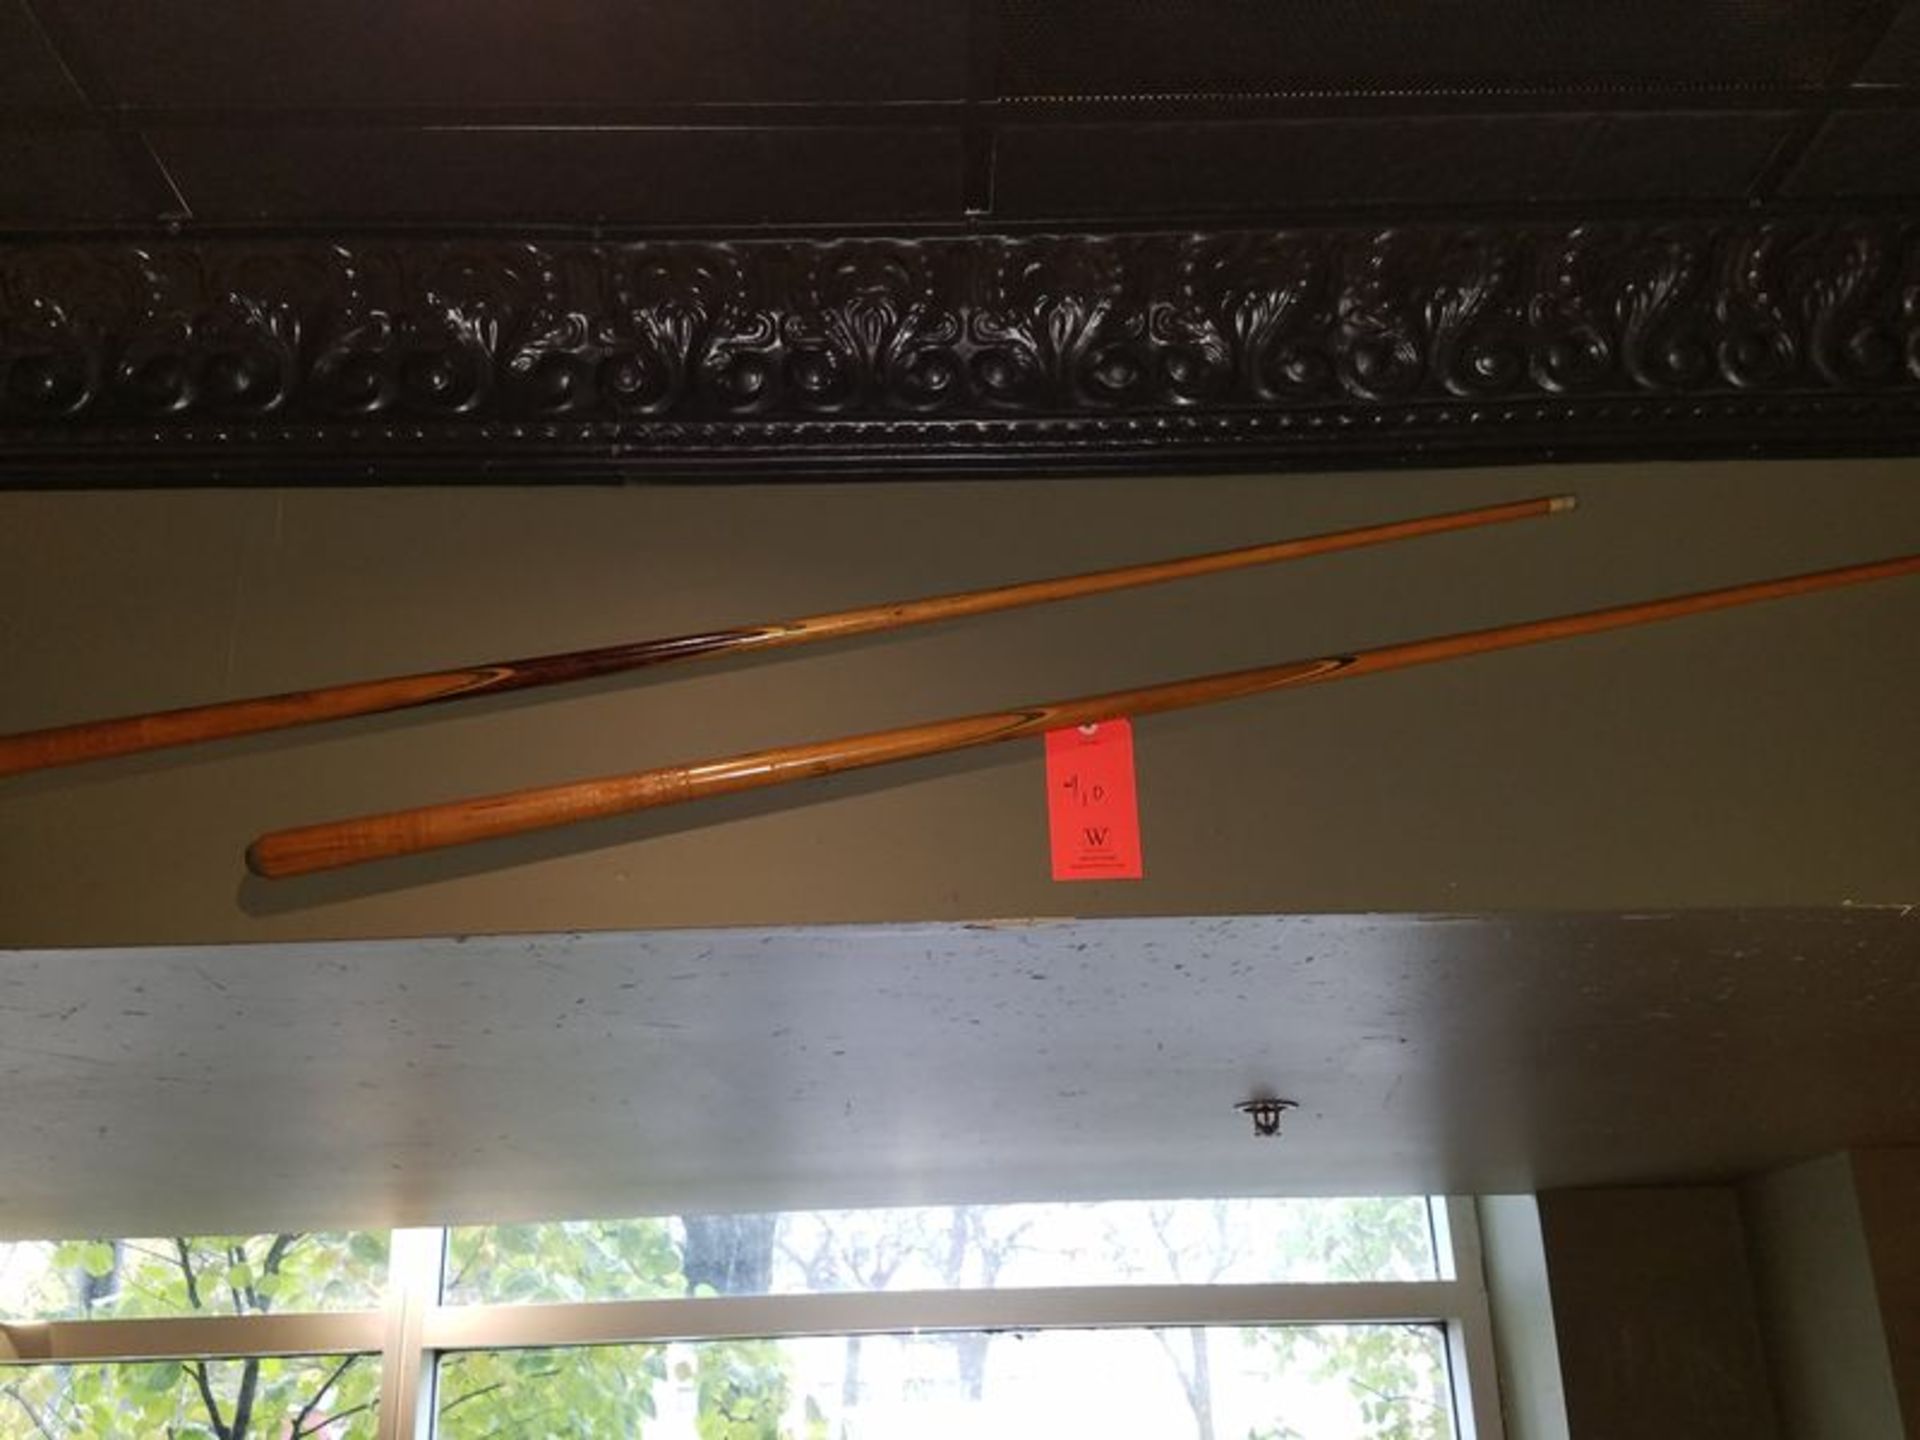 Lot - Antique Cue Rack with (5) Cues in Rack, (6) Additional Cues (Wall-Mounted) - Image 4 of 6